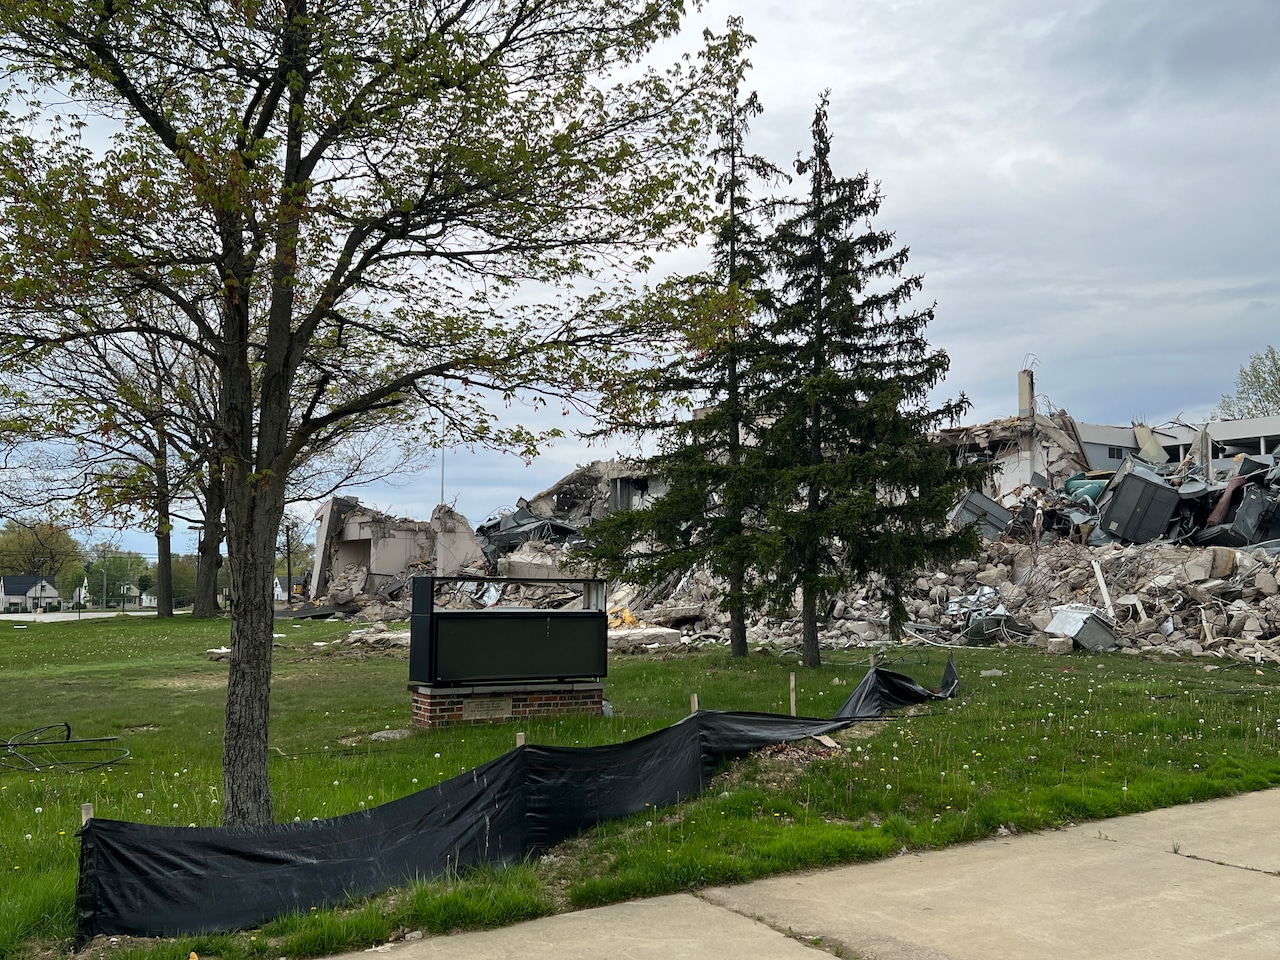 Demolition is nearly complete at Parma High School